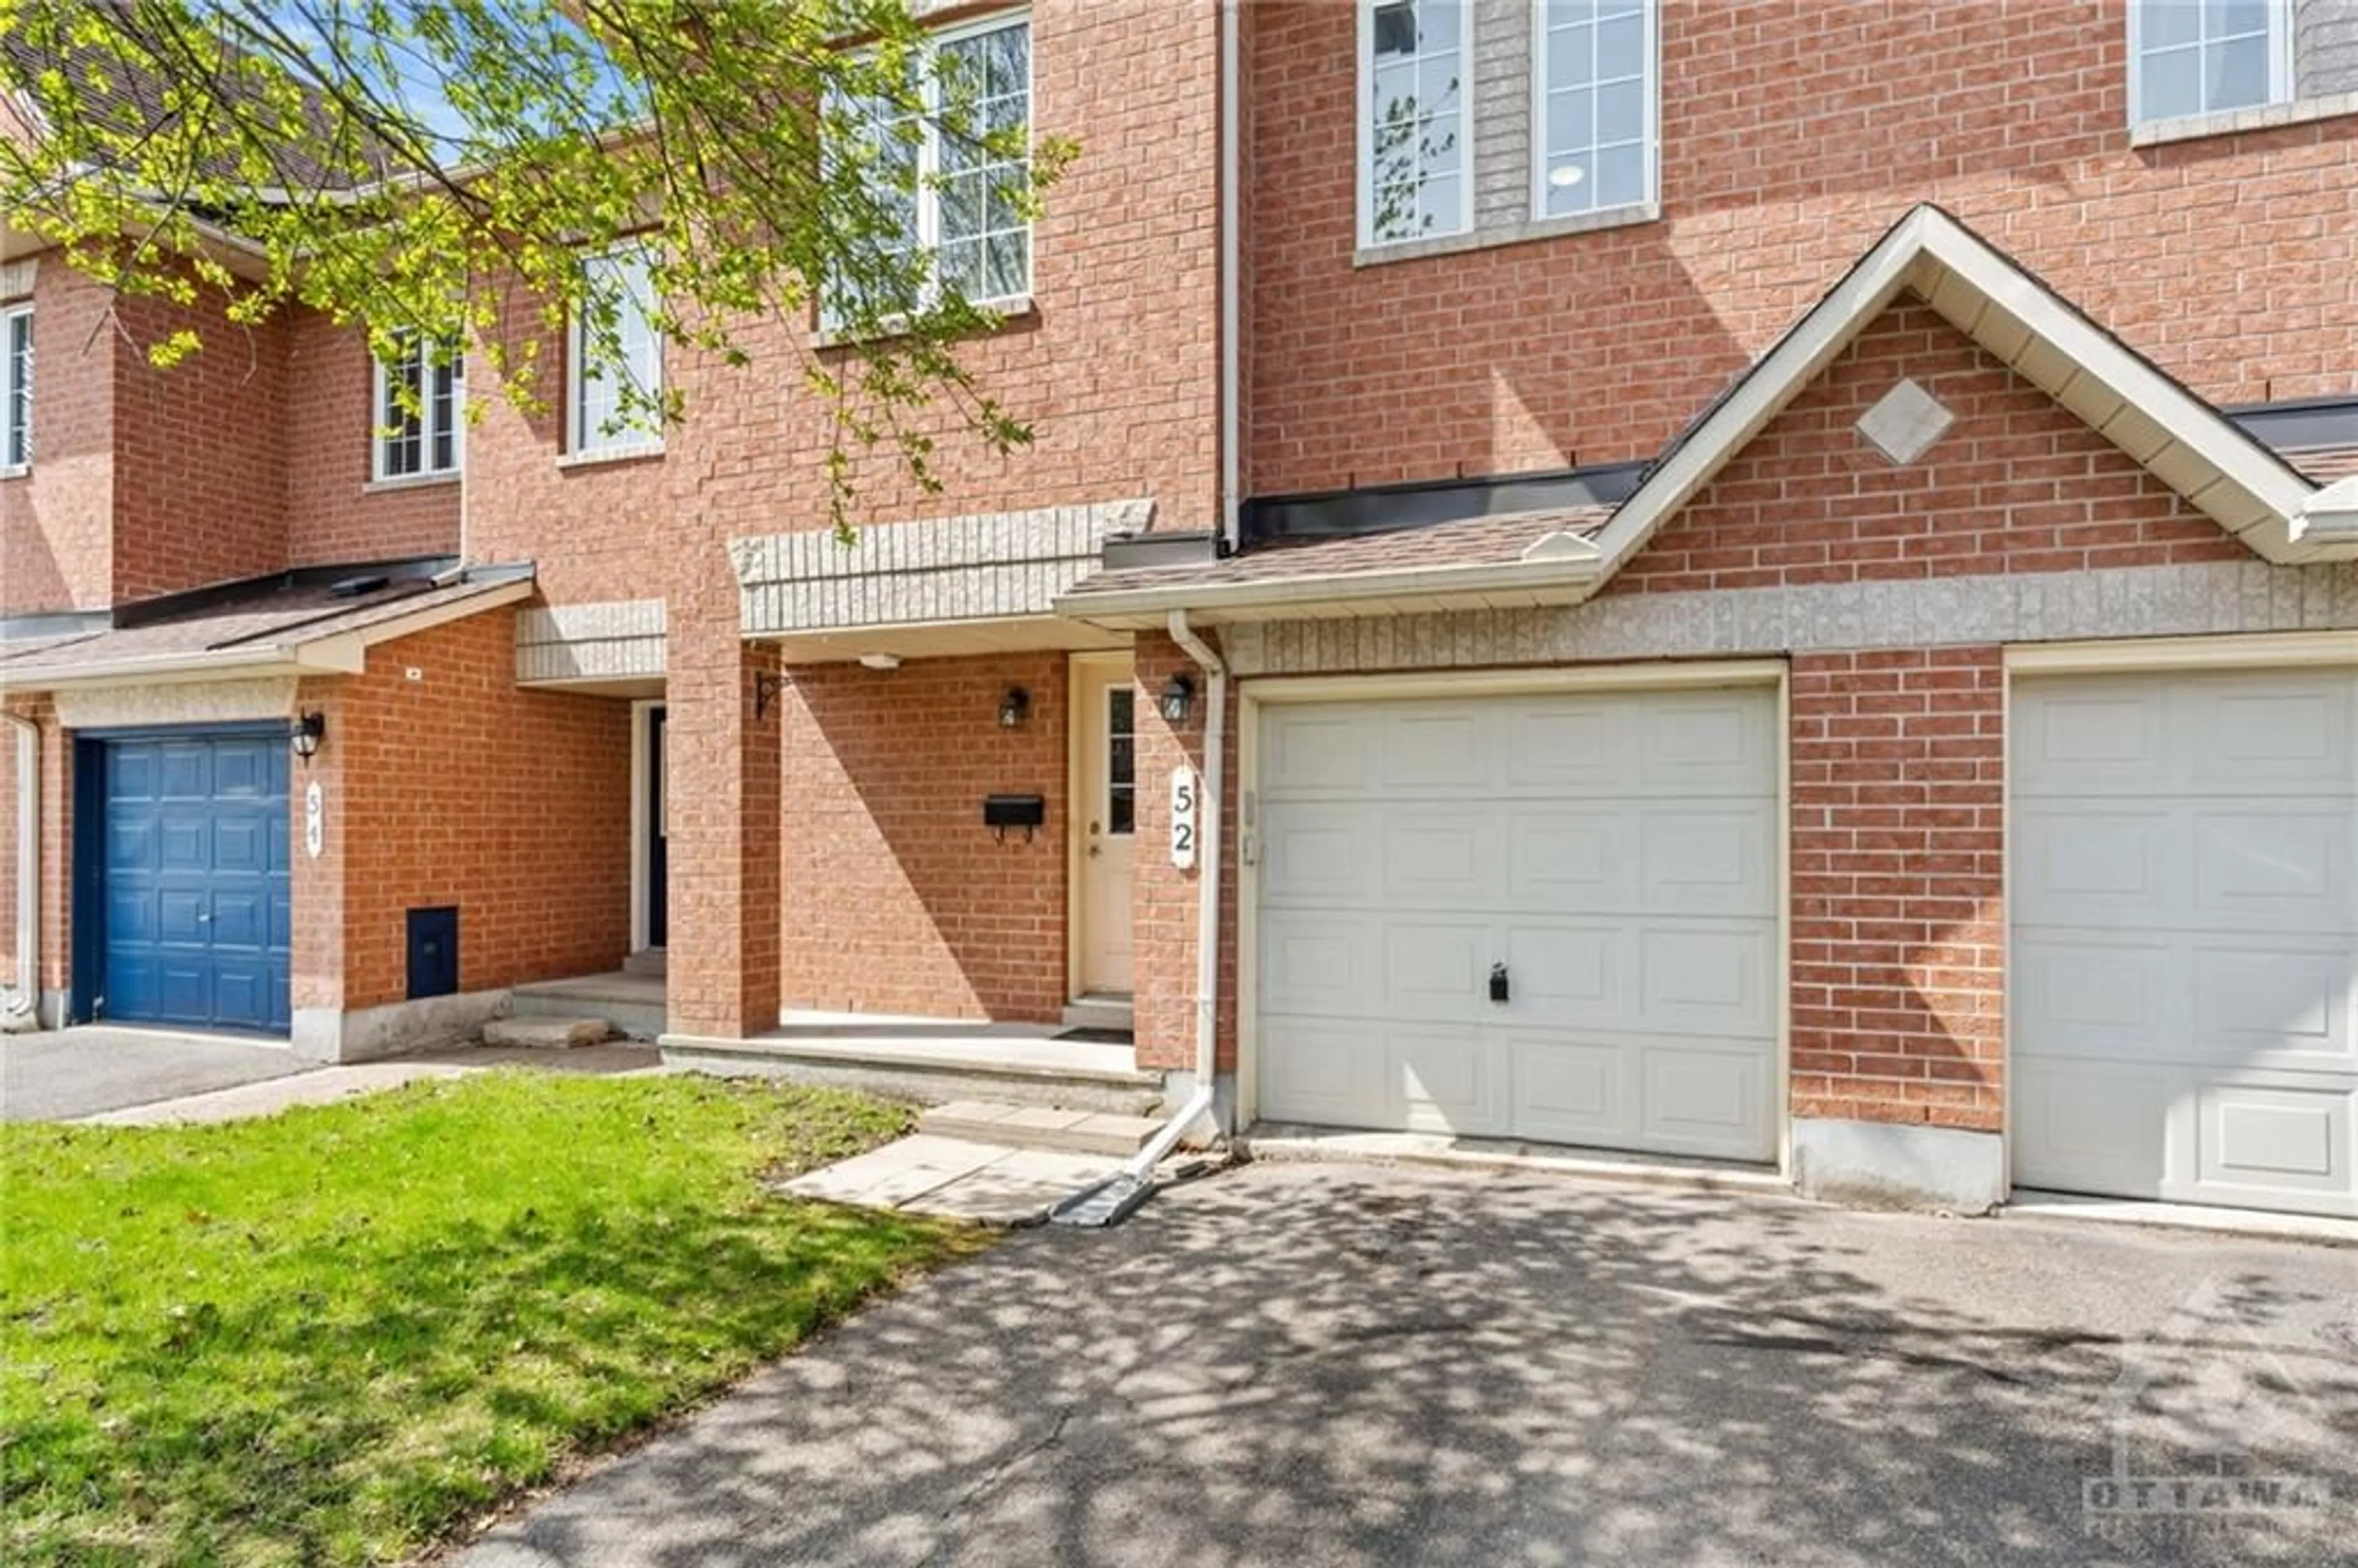 Home with brick exterior material for 52 LANDOVER Cres, Ottawa Ontario K2M 2W3